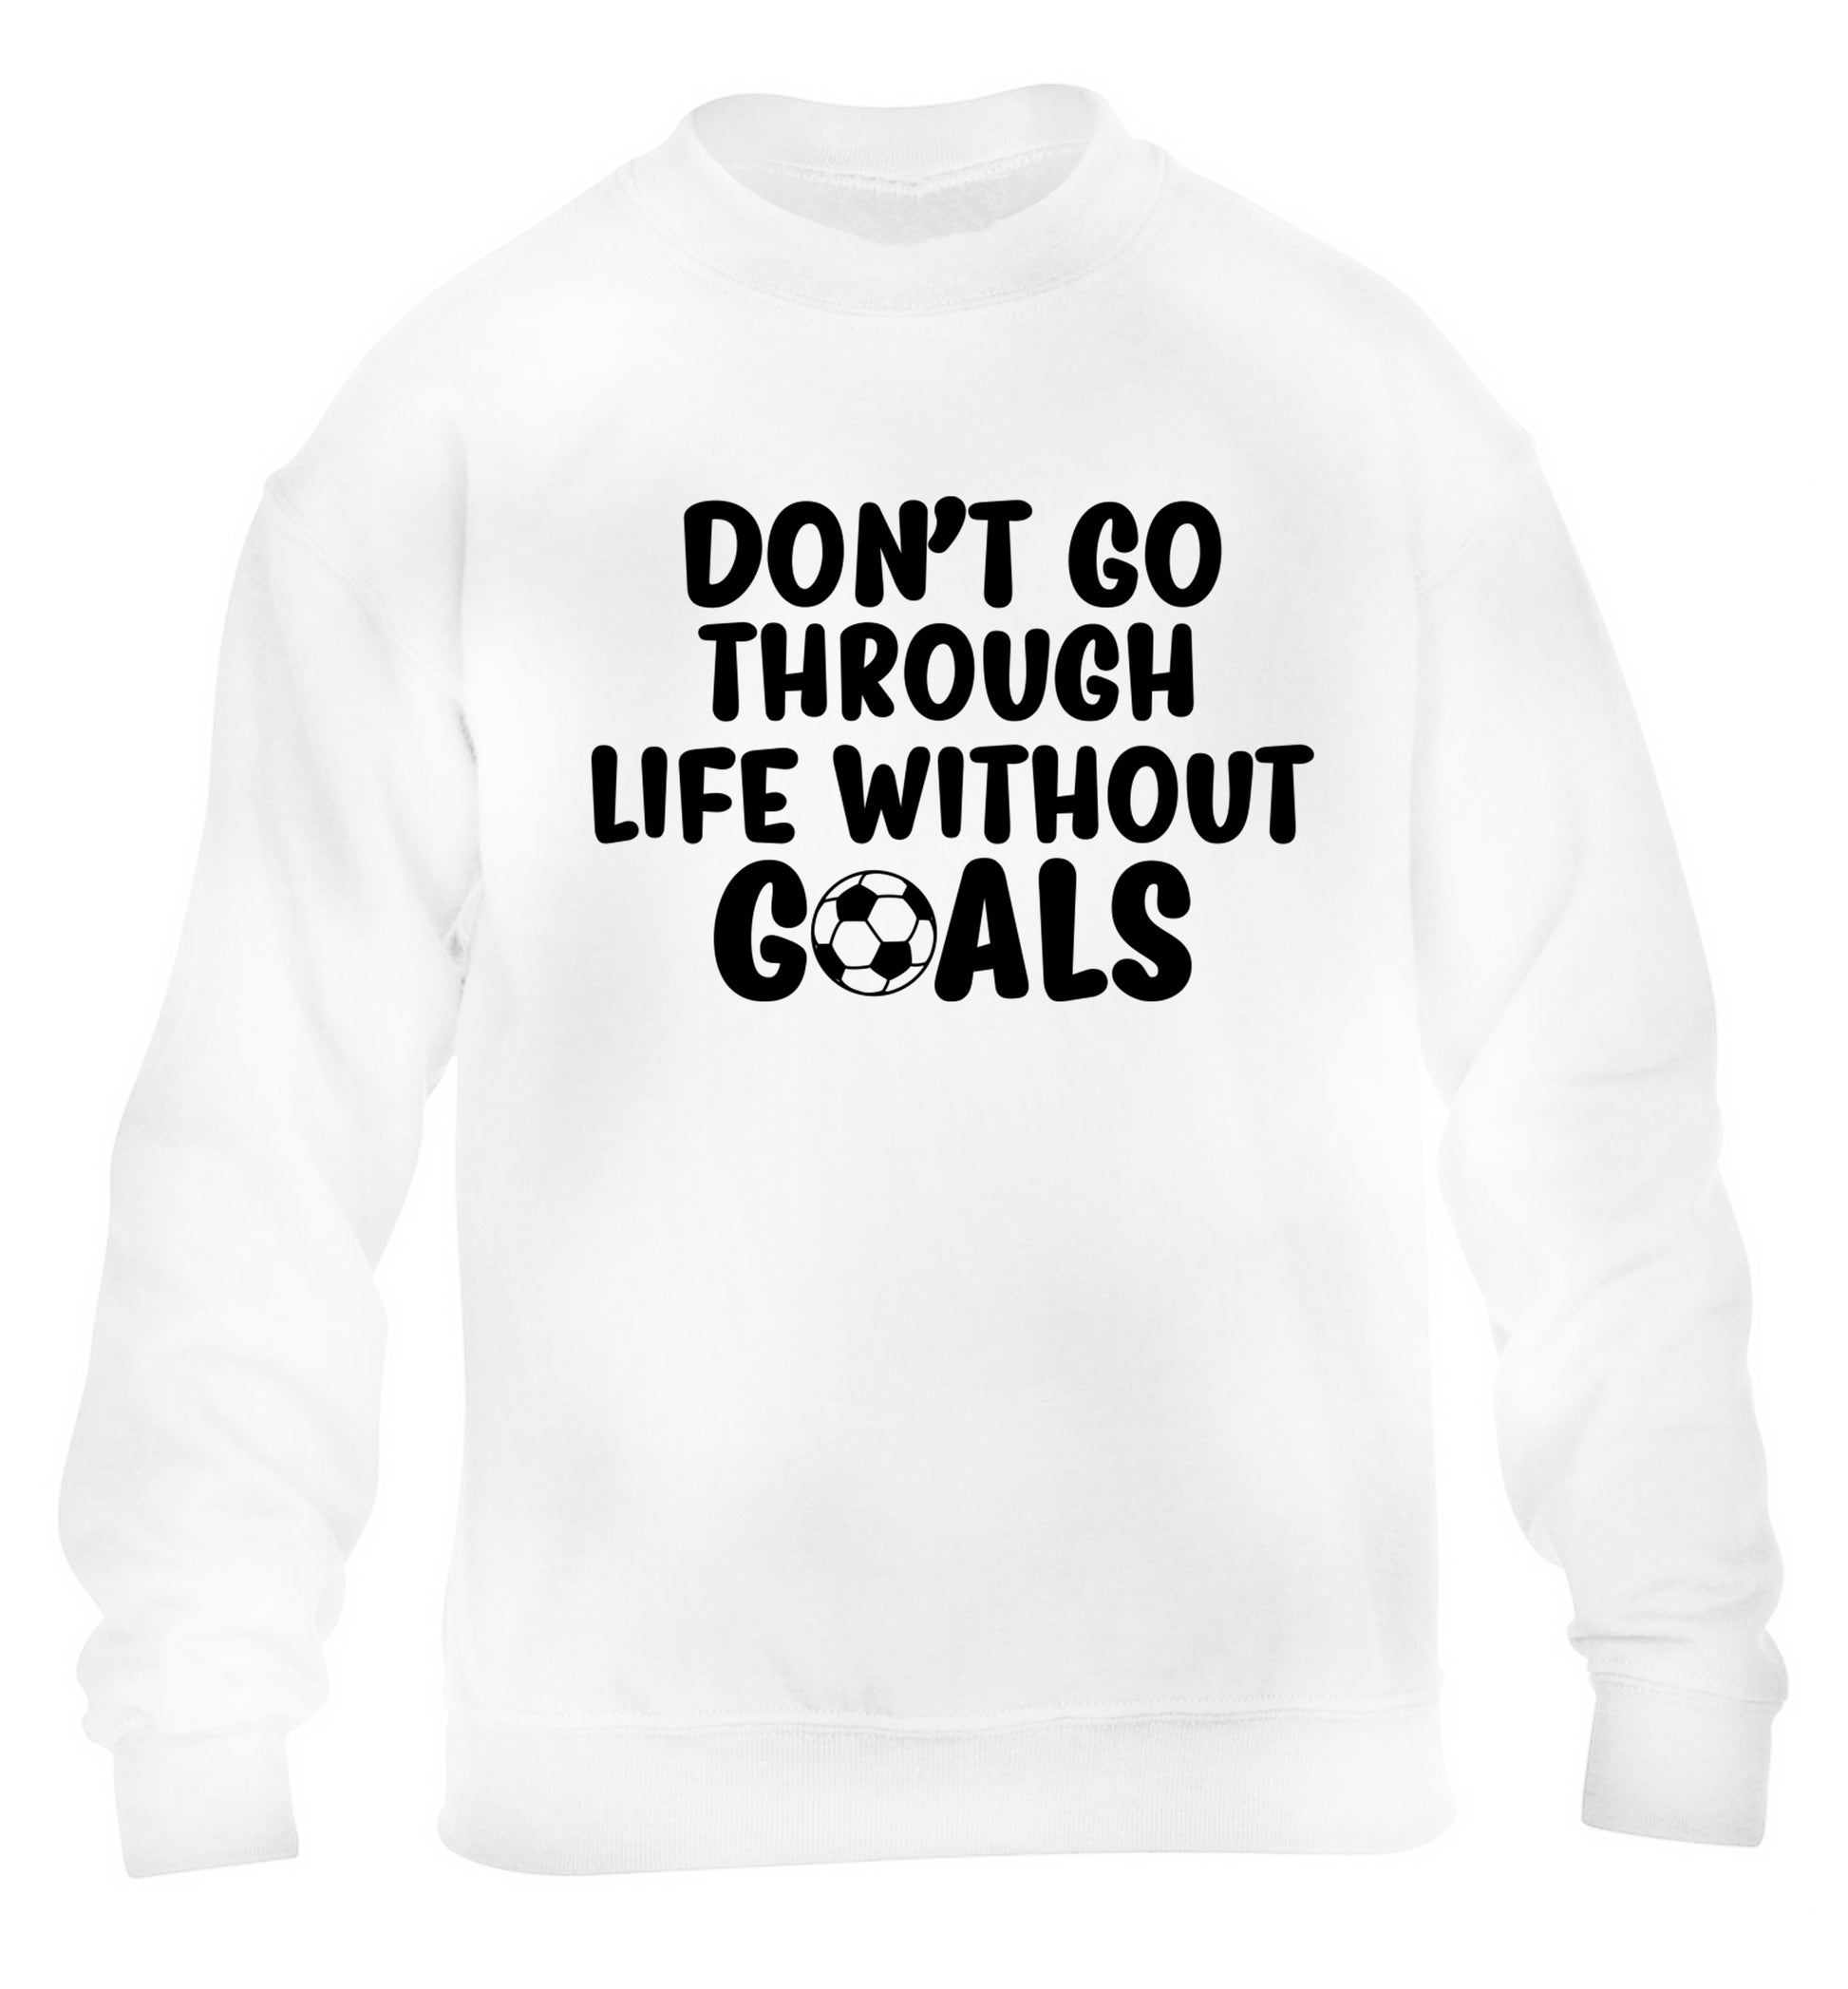 Don't go through life without goals children's white sweater 12-14 Years